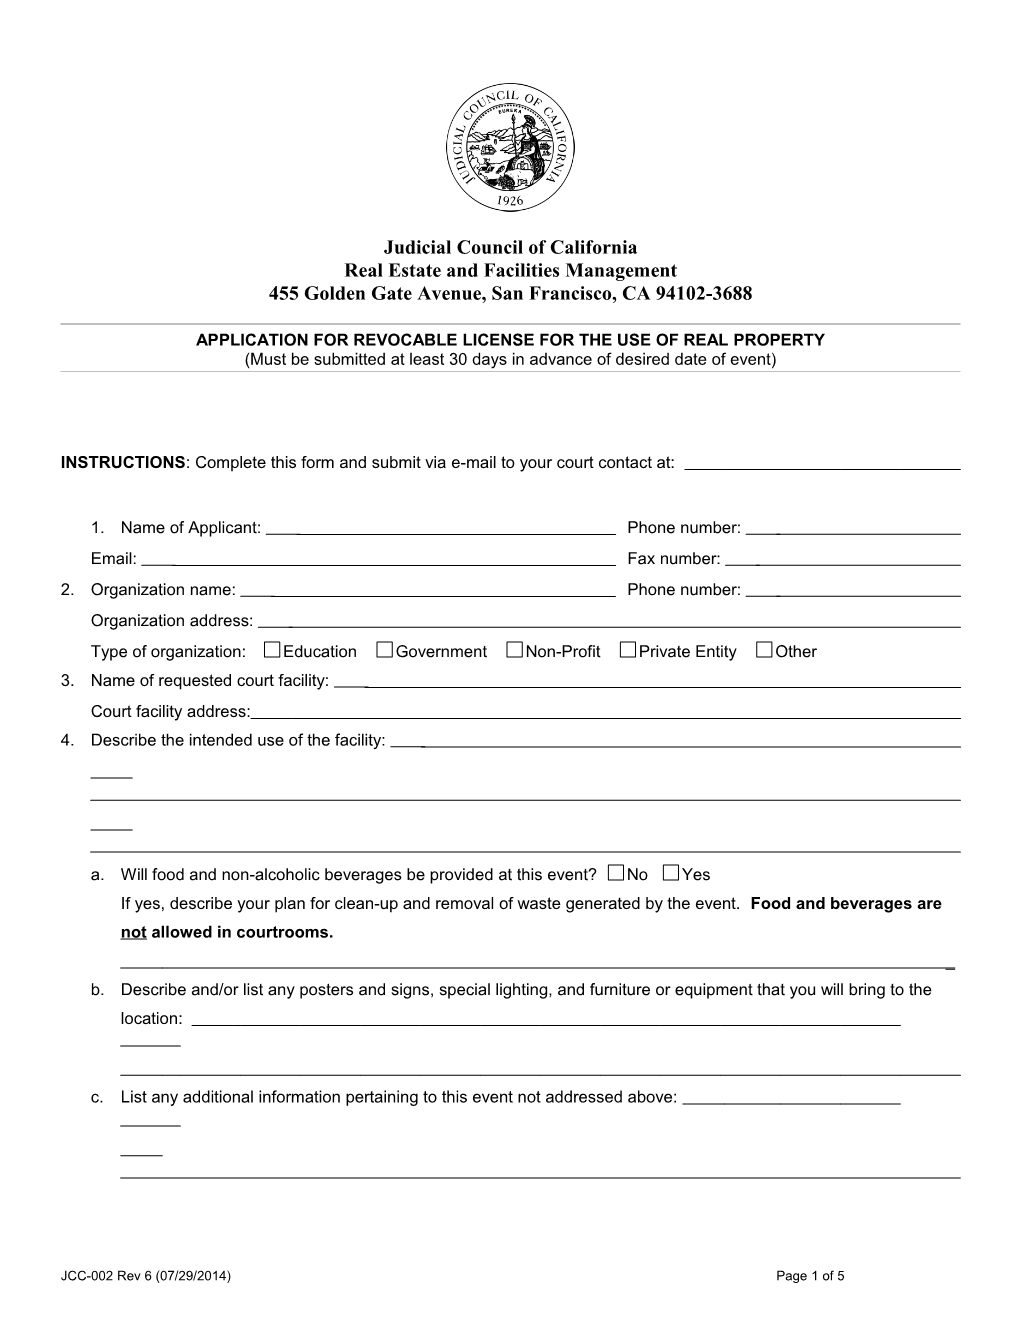 Application for Event License